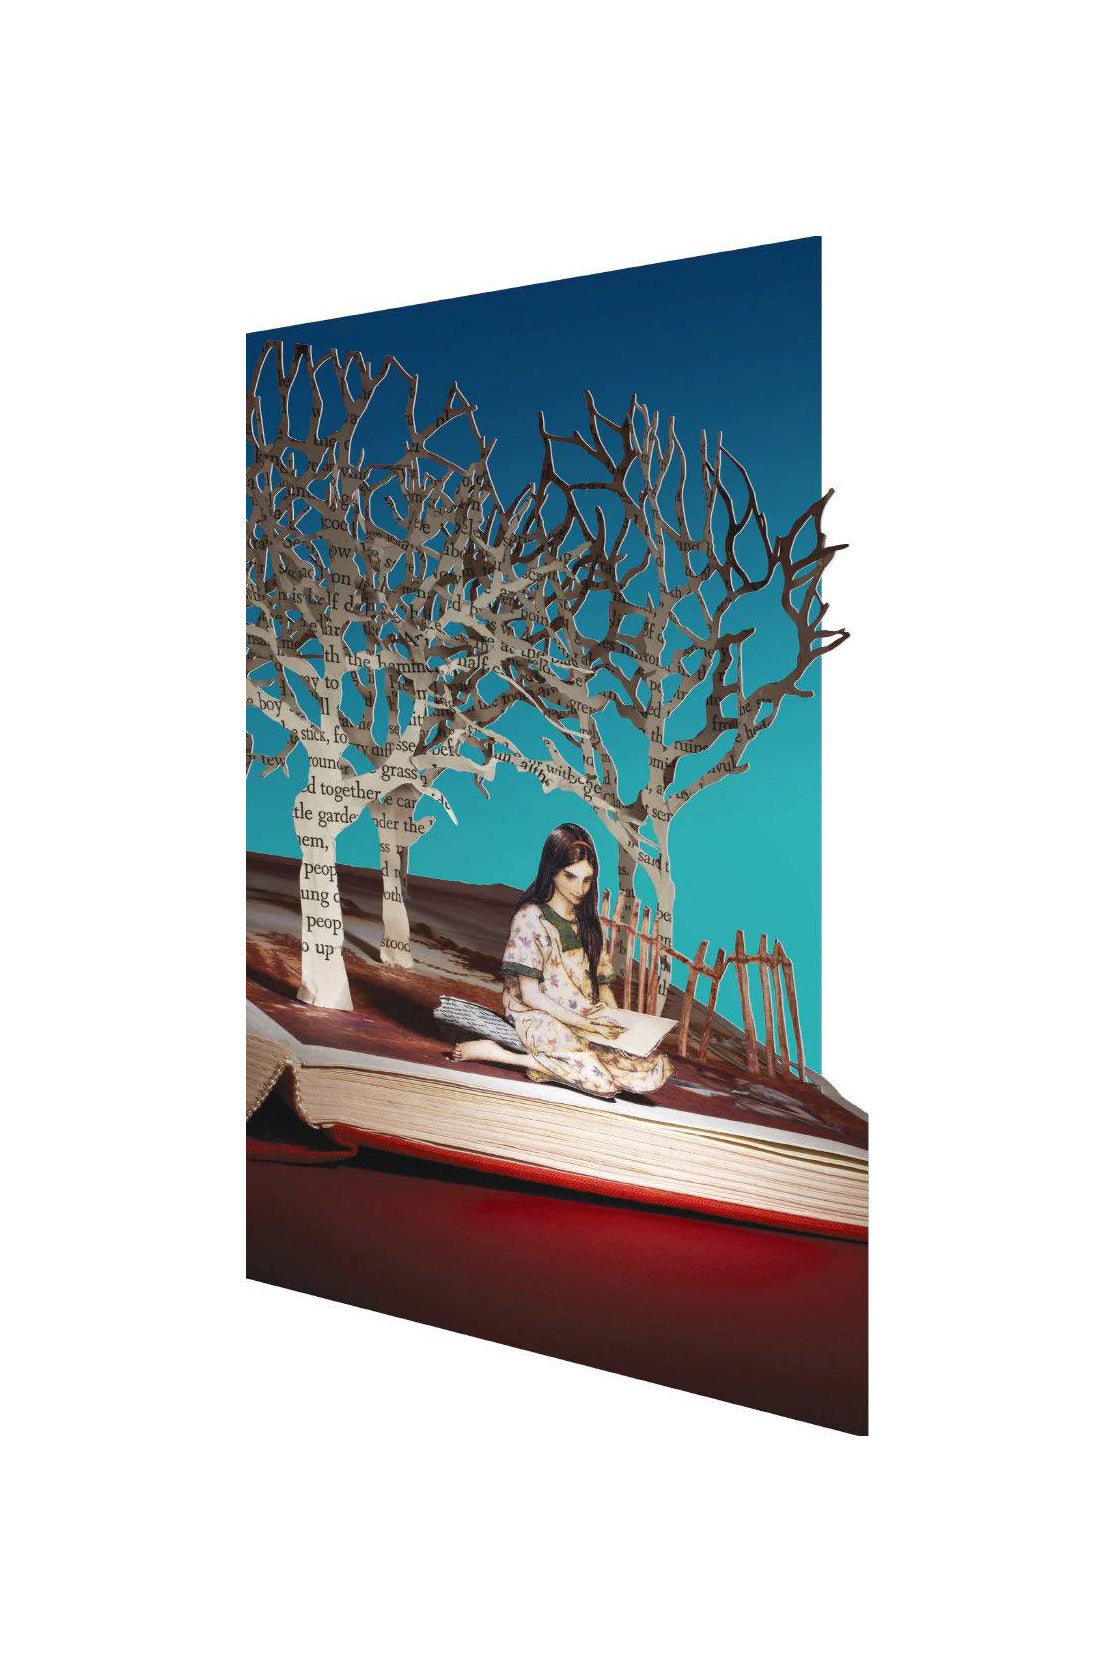 Greetings card with girl reading under a tree on the front cover